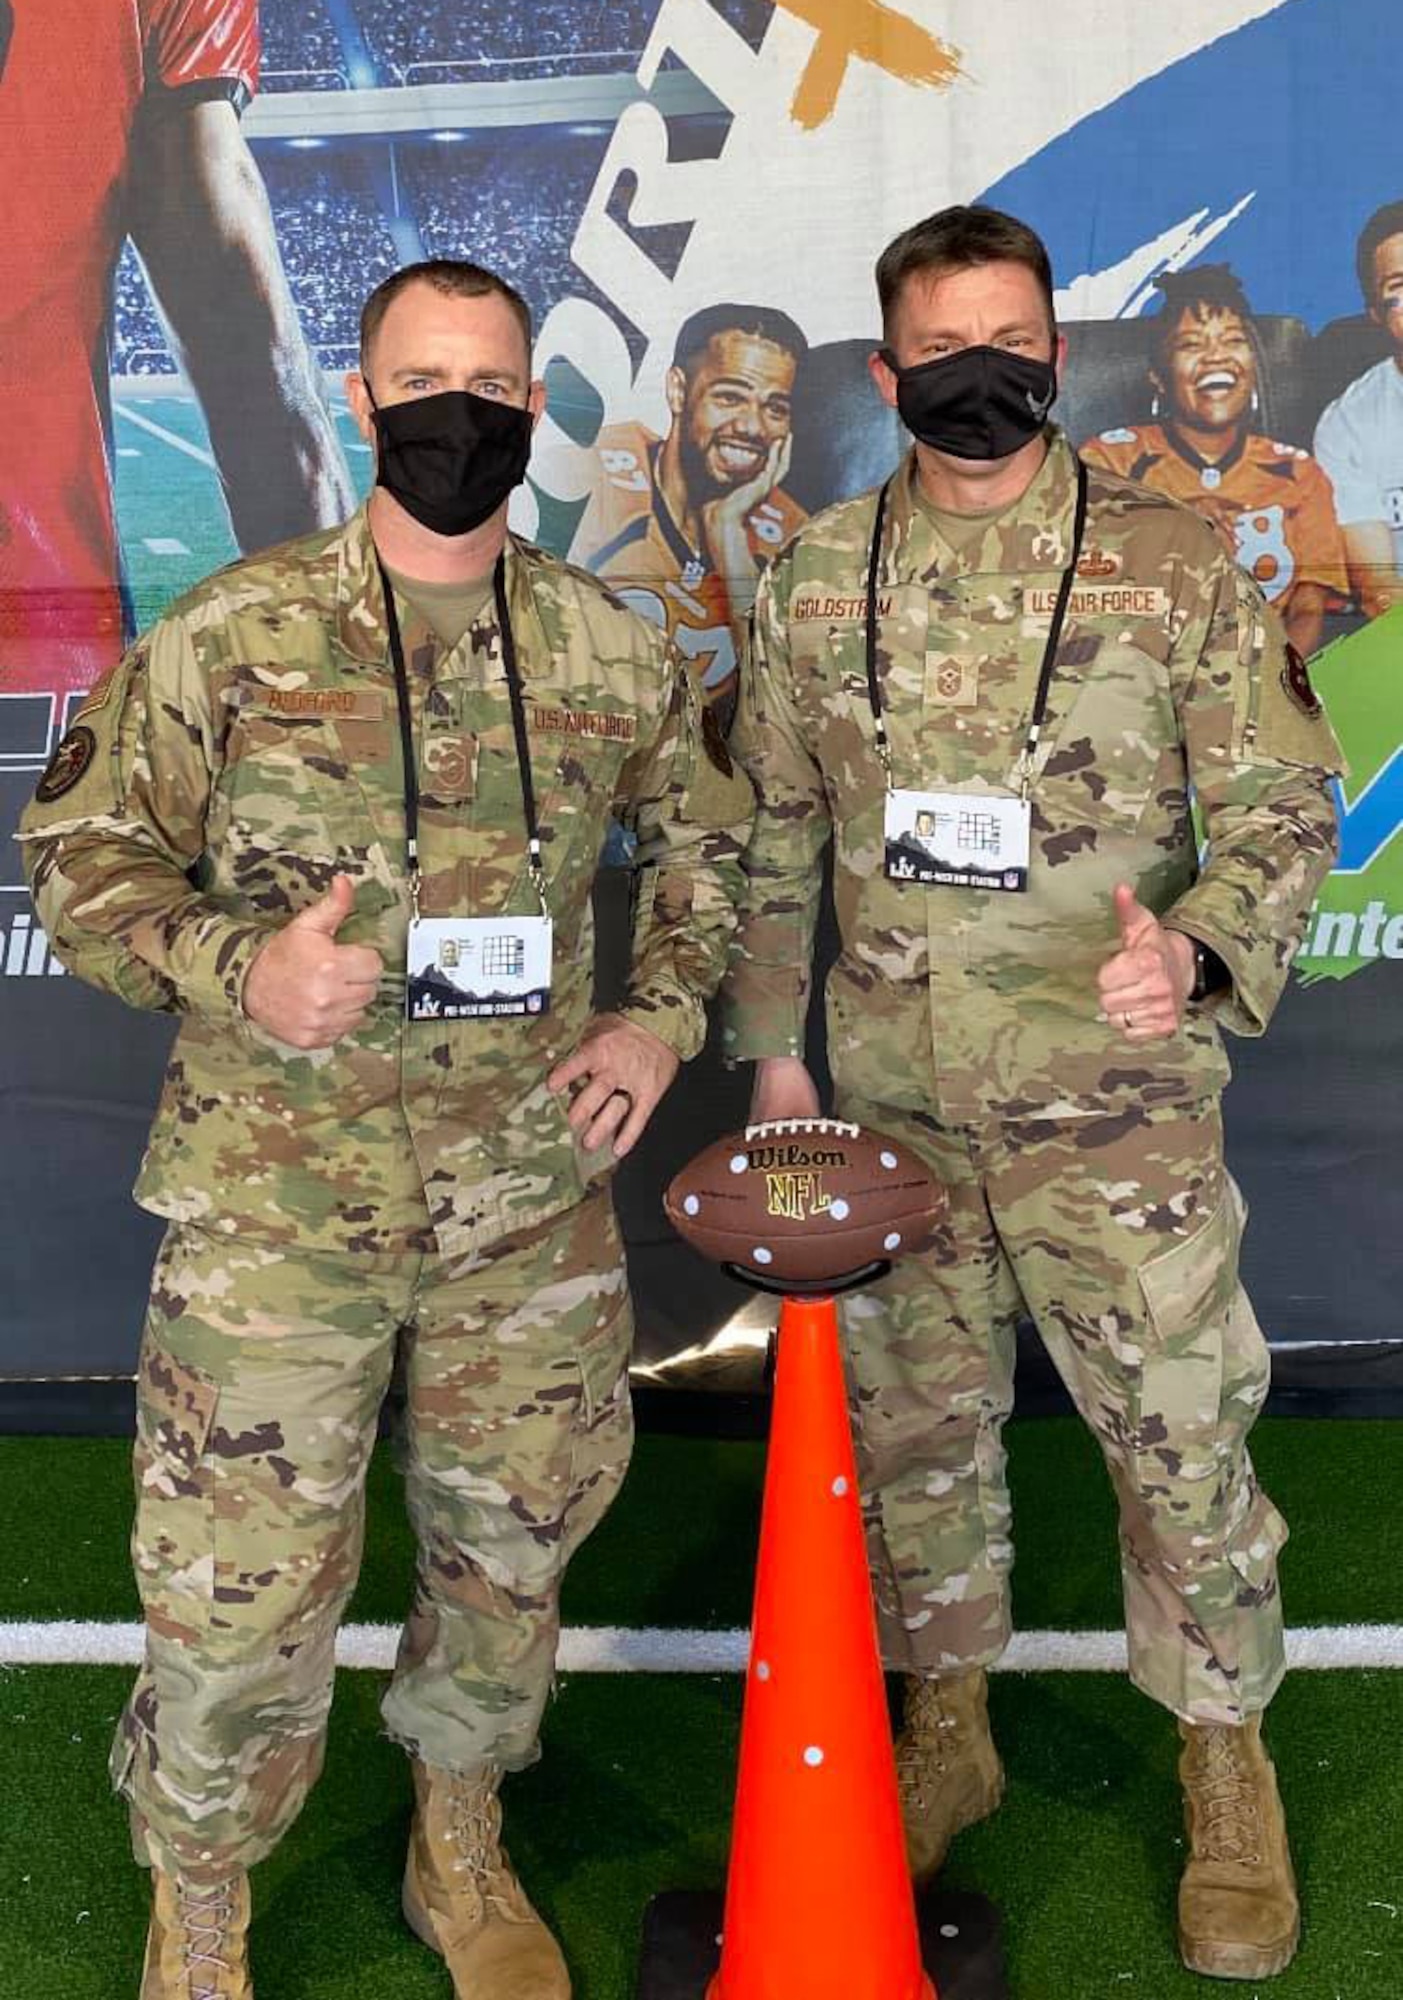 Master Sgt. Daniel Bedford, Air Force Recruiting Service national events program manager, and Chief Master Sgt. Antonio Goldstrom, AFRS command chief, pose for a photo at the AIR RAID QB SIM Experience during the Super Bowl LV Experience outside of Raymond James Stadium in Tampa, Florida, Jan. 31, 2021.